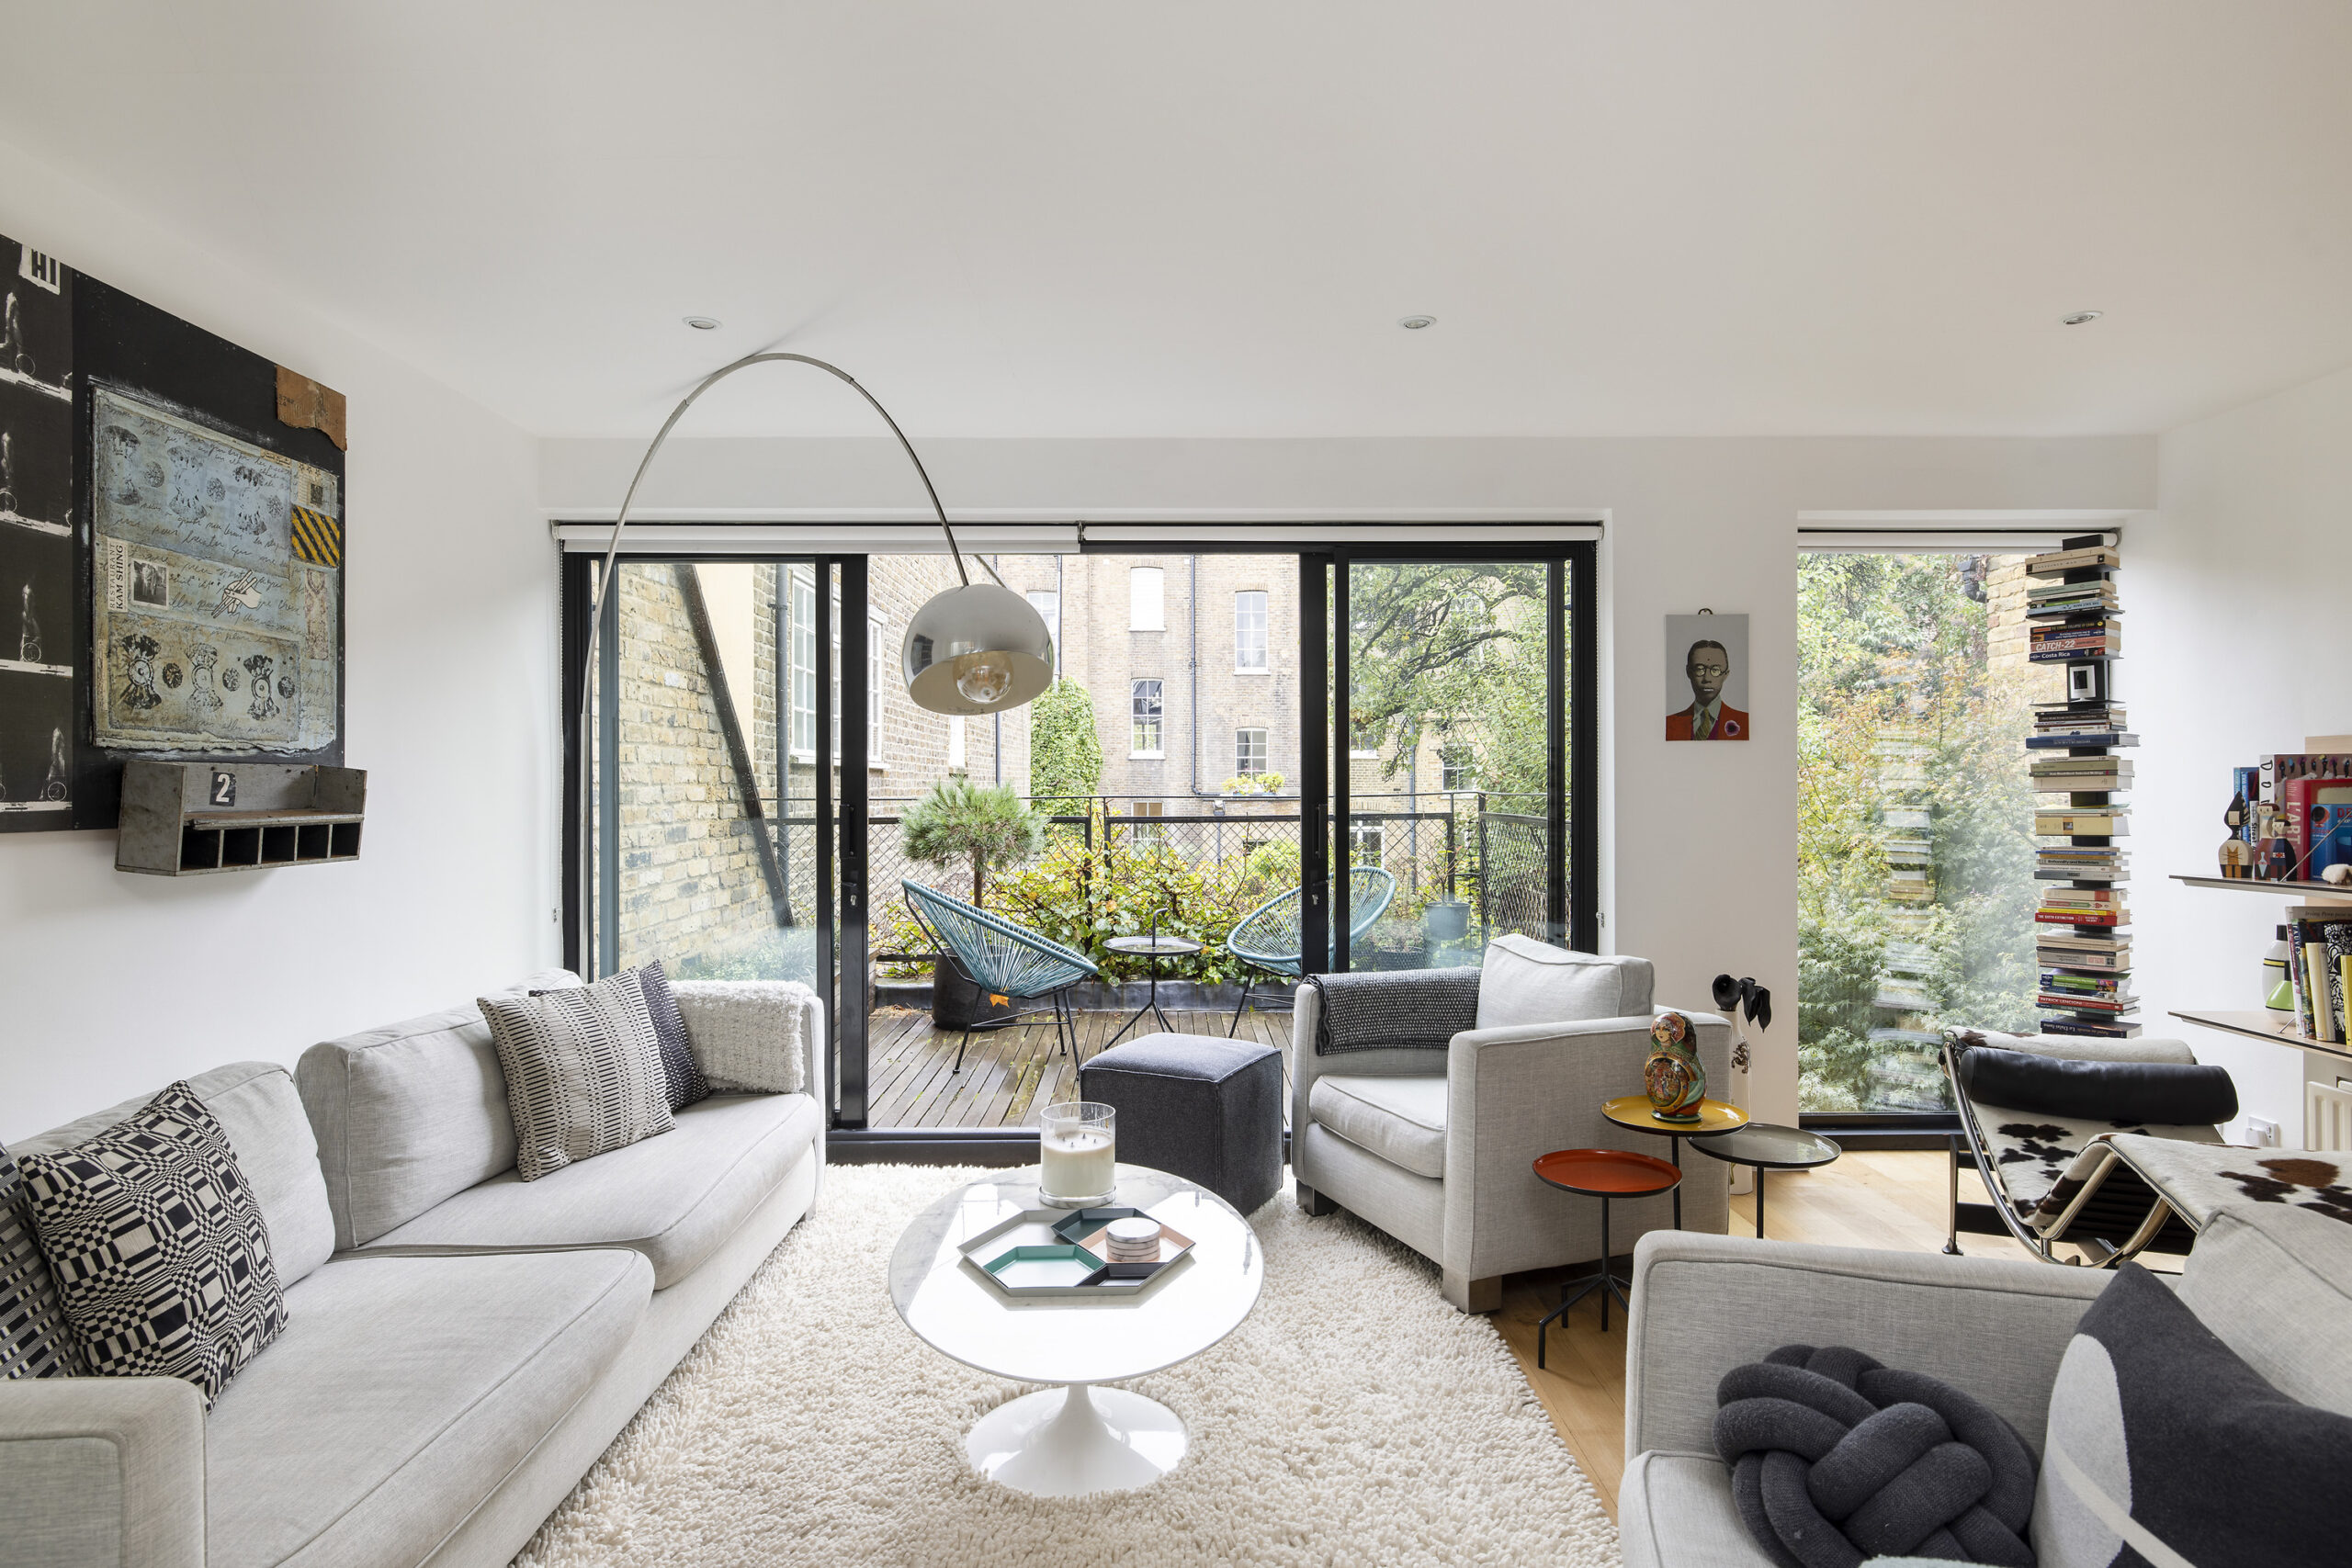 For Sale: Holland Park Princes Yard W11 open-plan reception room with minimalist interior design